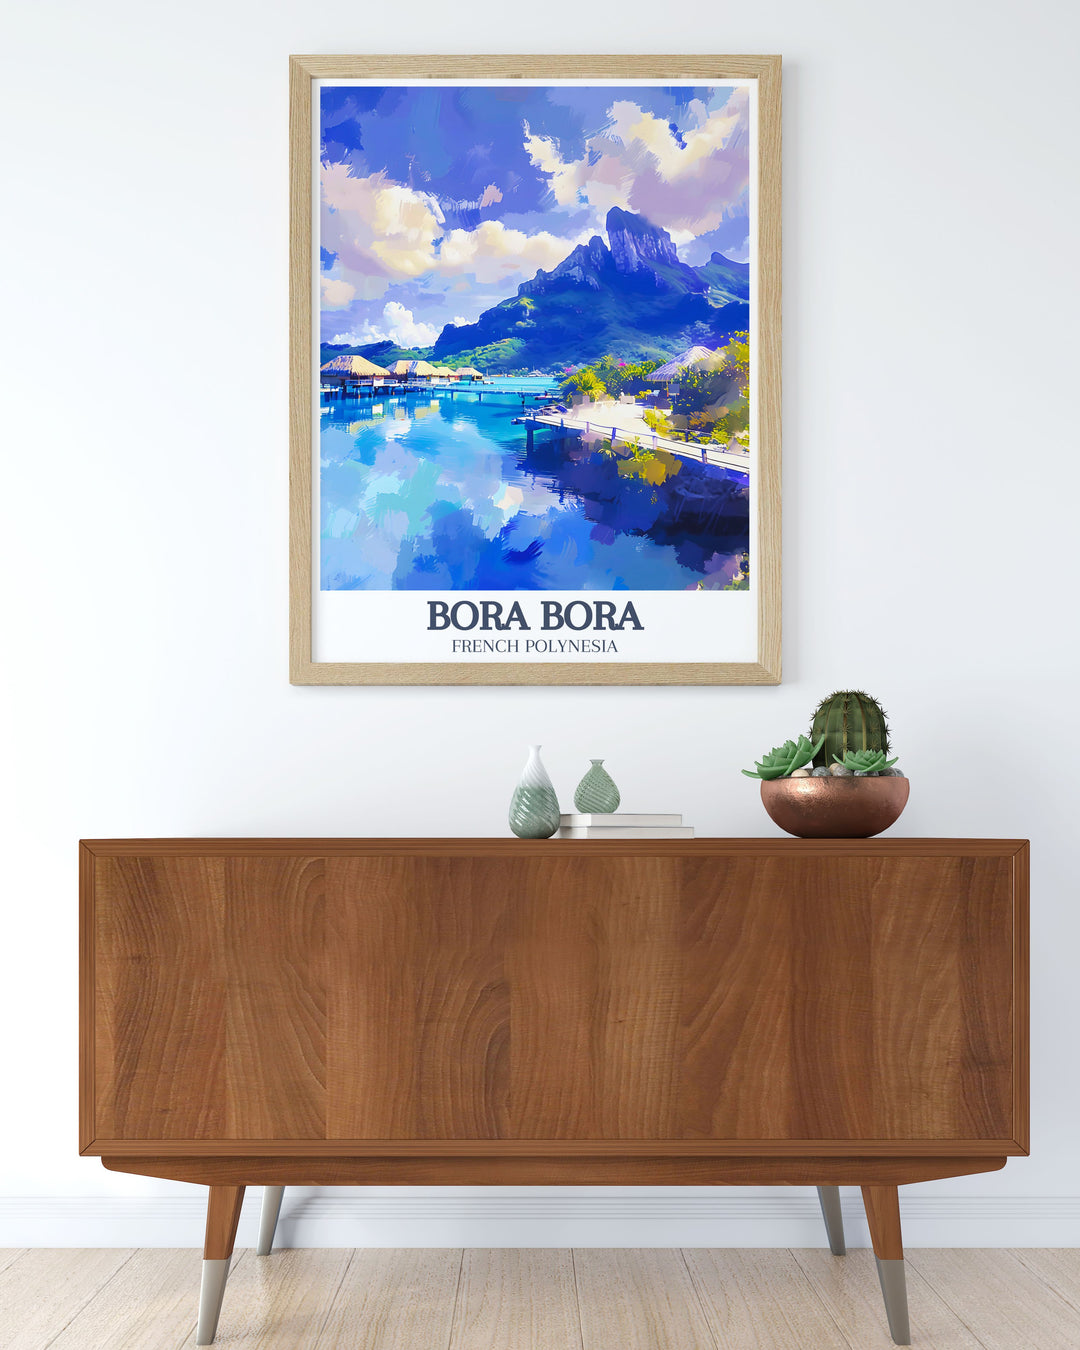 Retro travel poster of Mount Otemanu Matira Beach highlighting the picturesque scenery of Bora Bora island this artwork is perfect for wall art enthusiasts seeking a unique and captivating piece to enhance their home decor and evoke a sense of nostalgia.